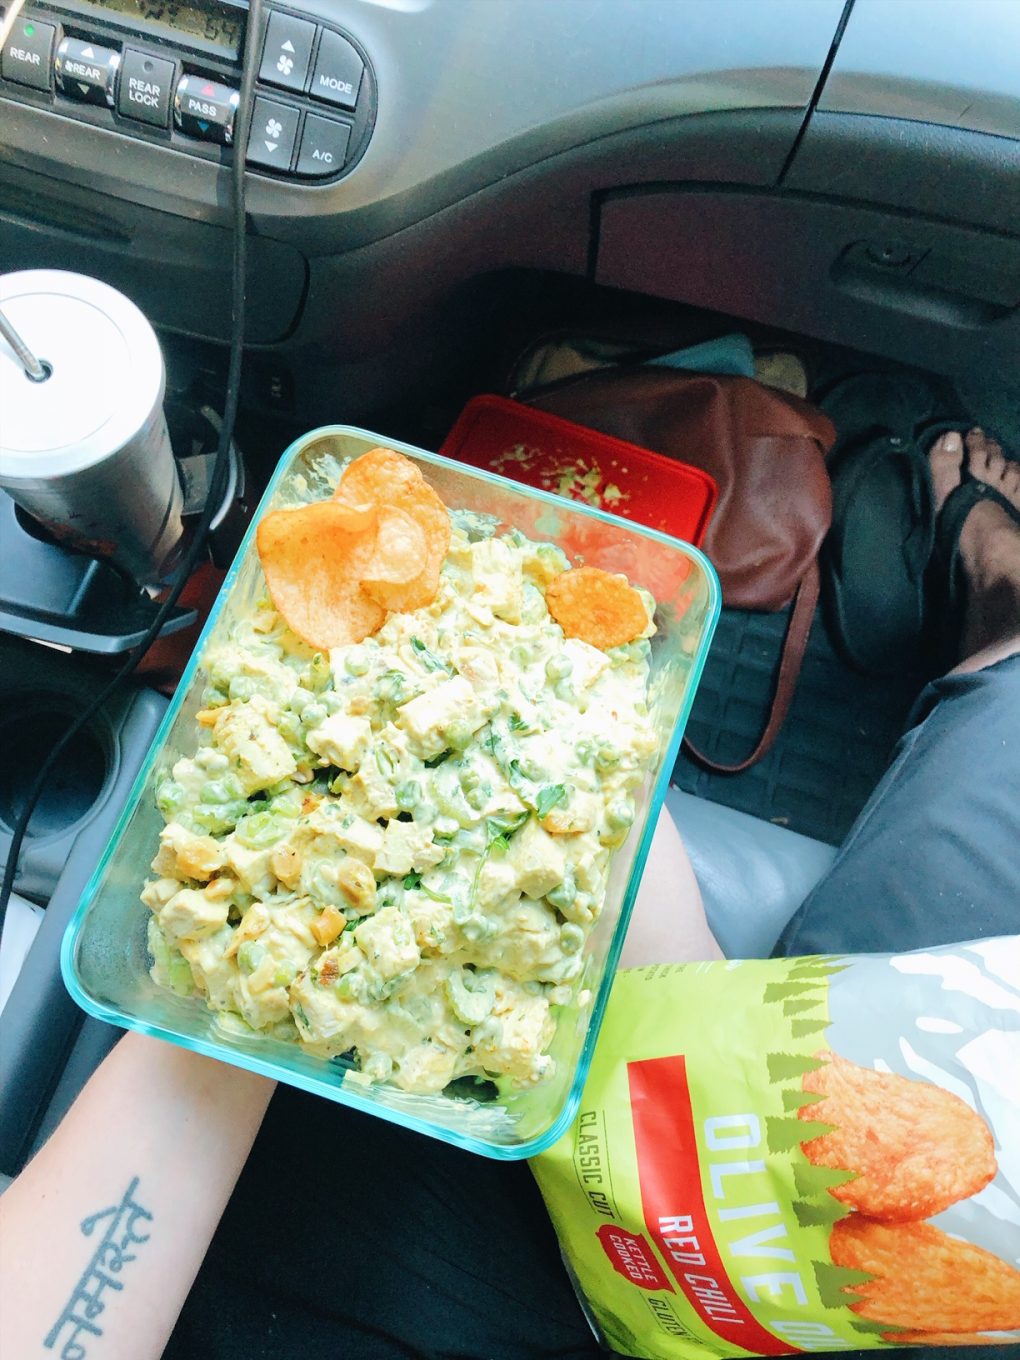 A person sitting in a car holding a glass tupperware with curried chicken salad and potato chips